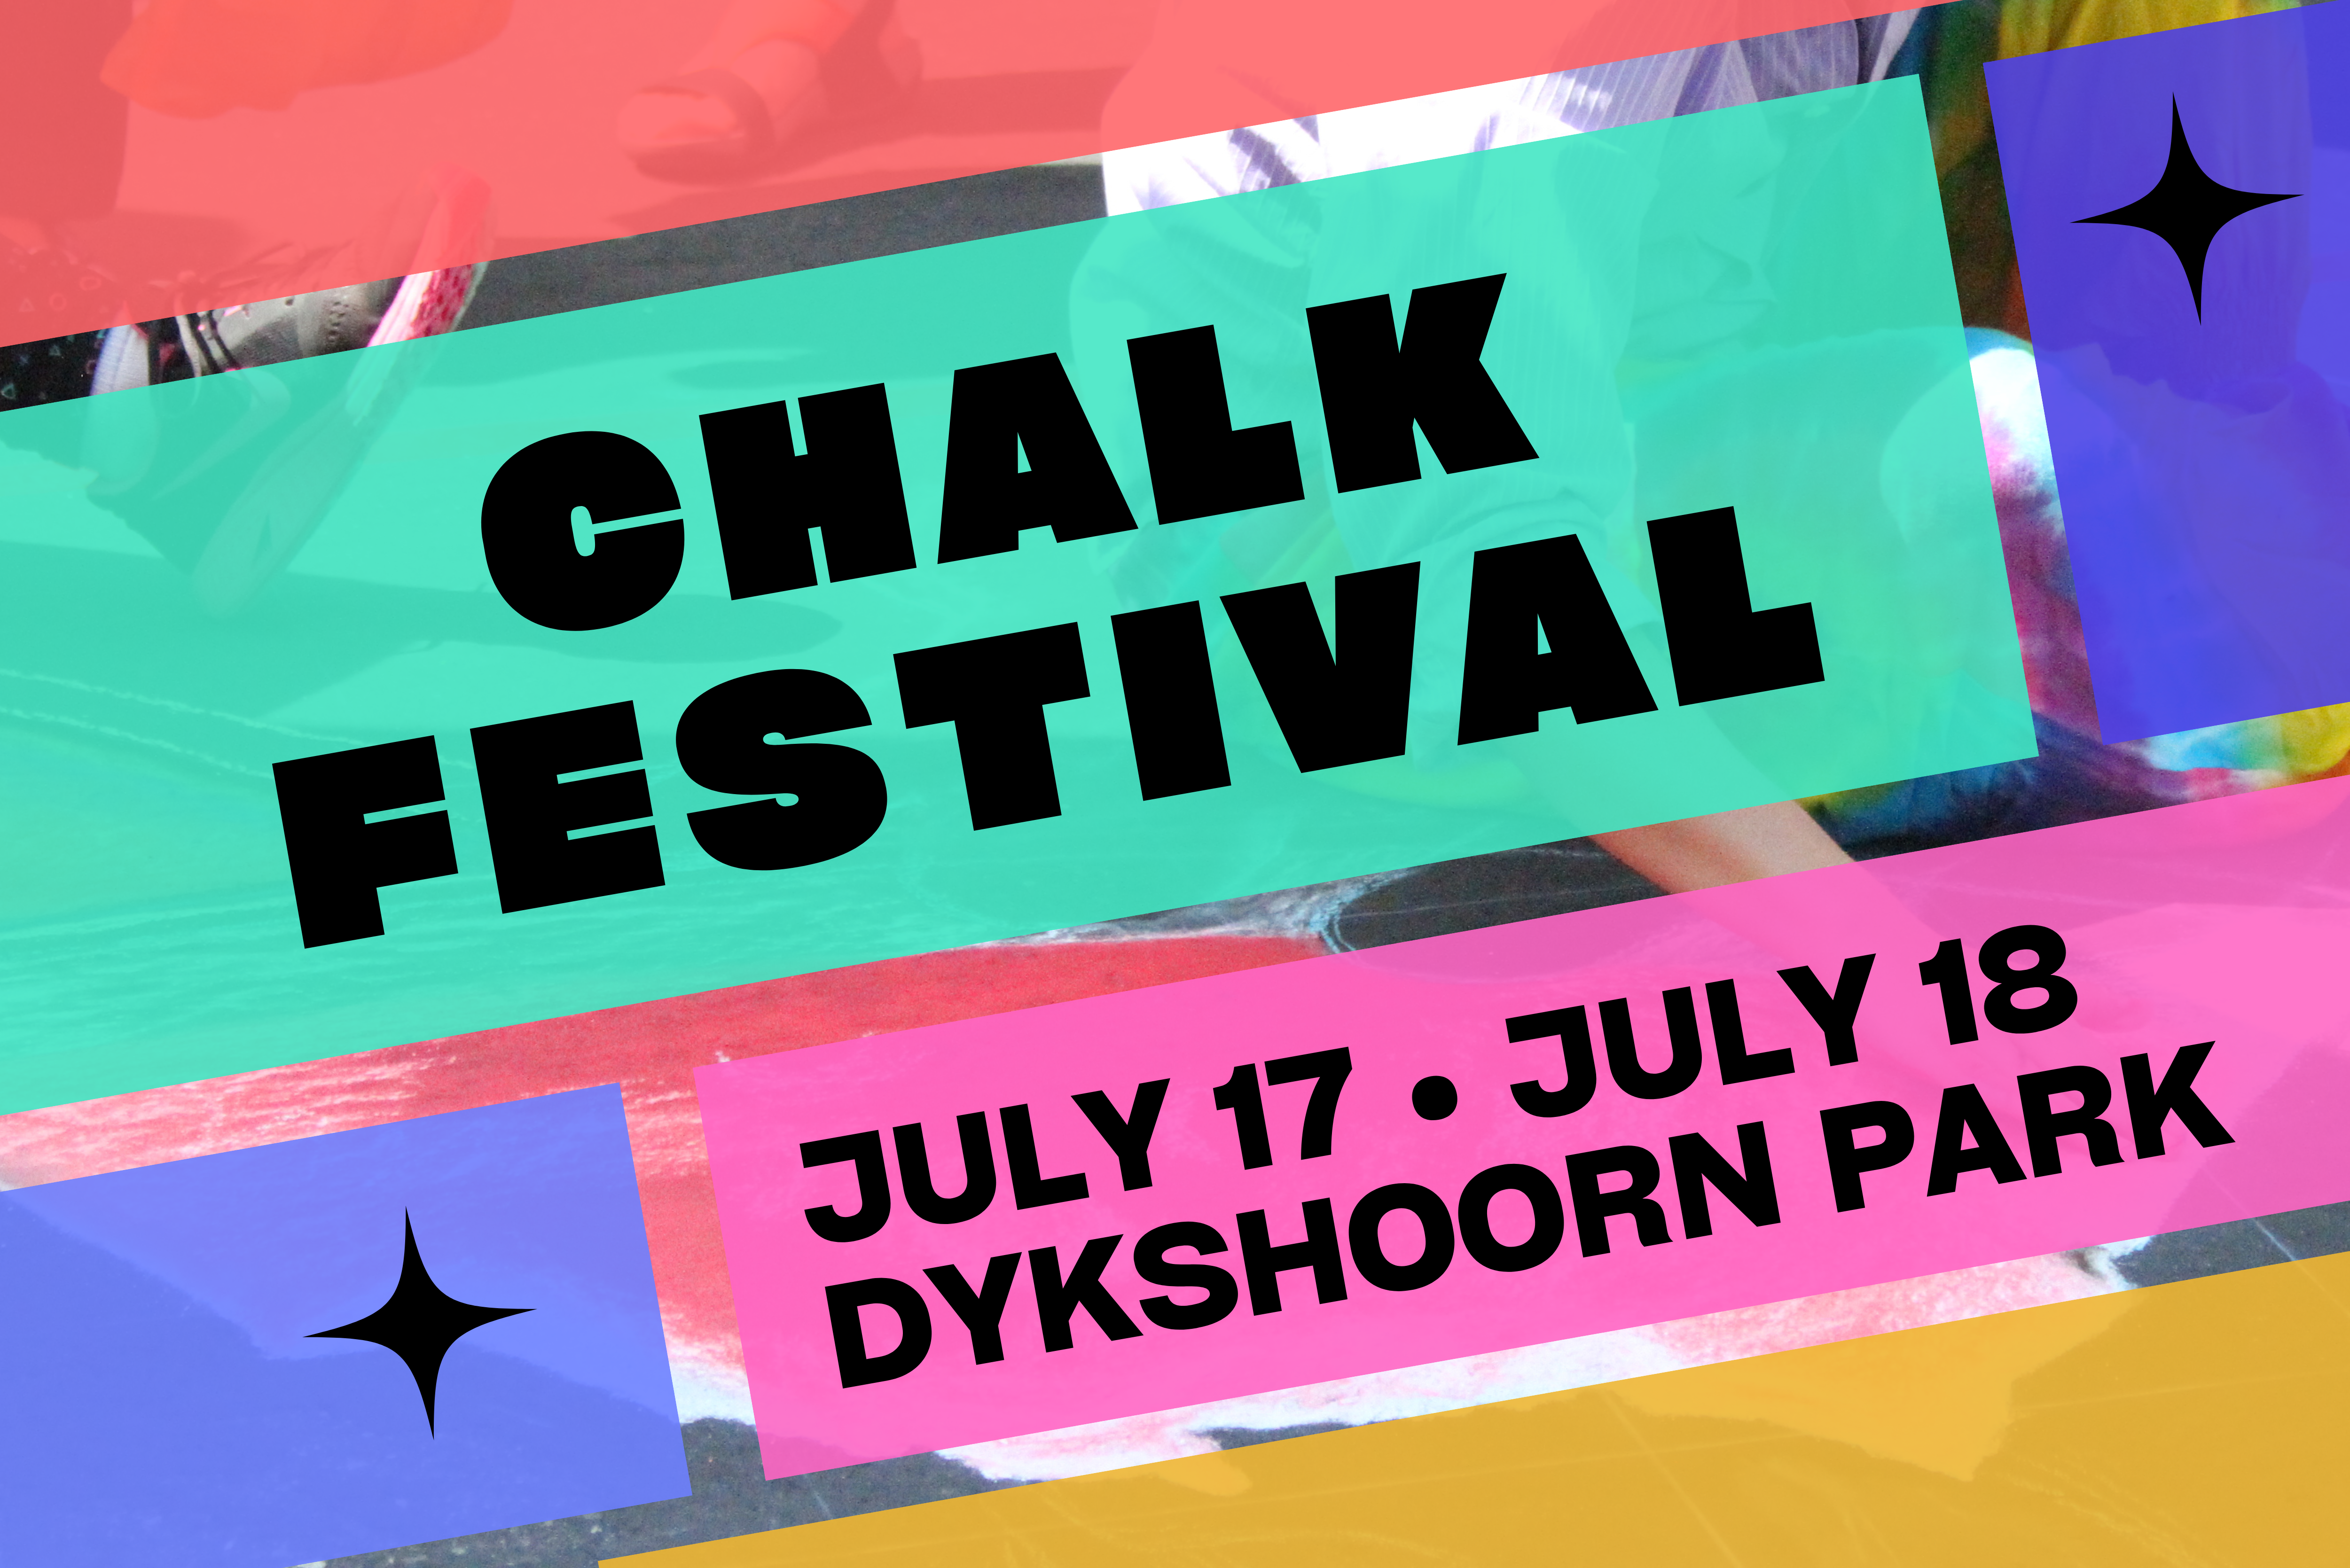 Featured image and link to Chalk Festival event